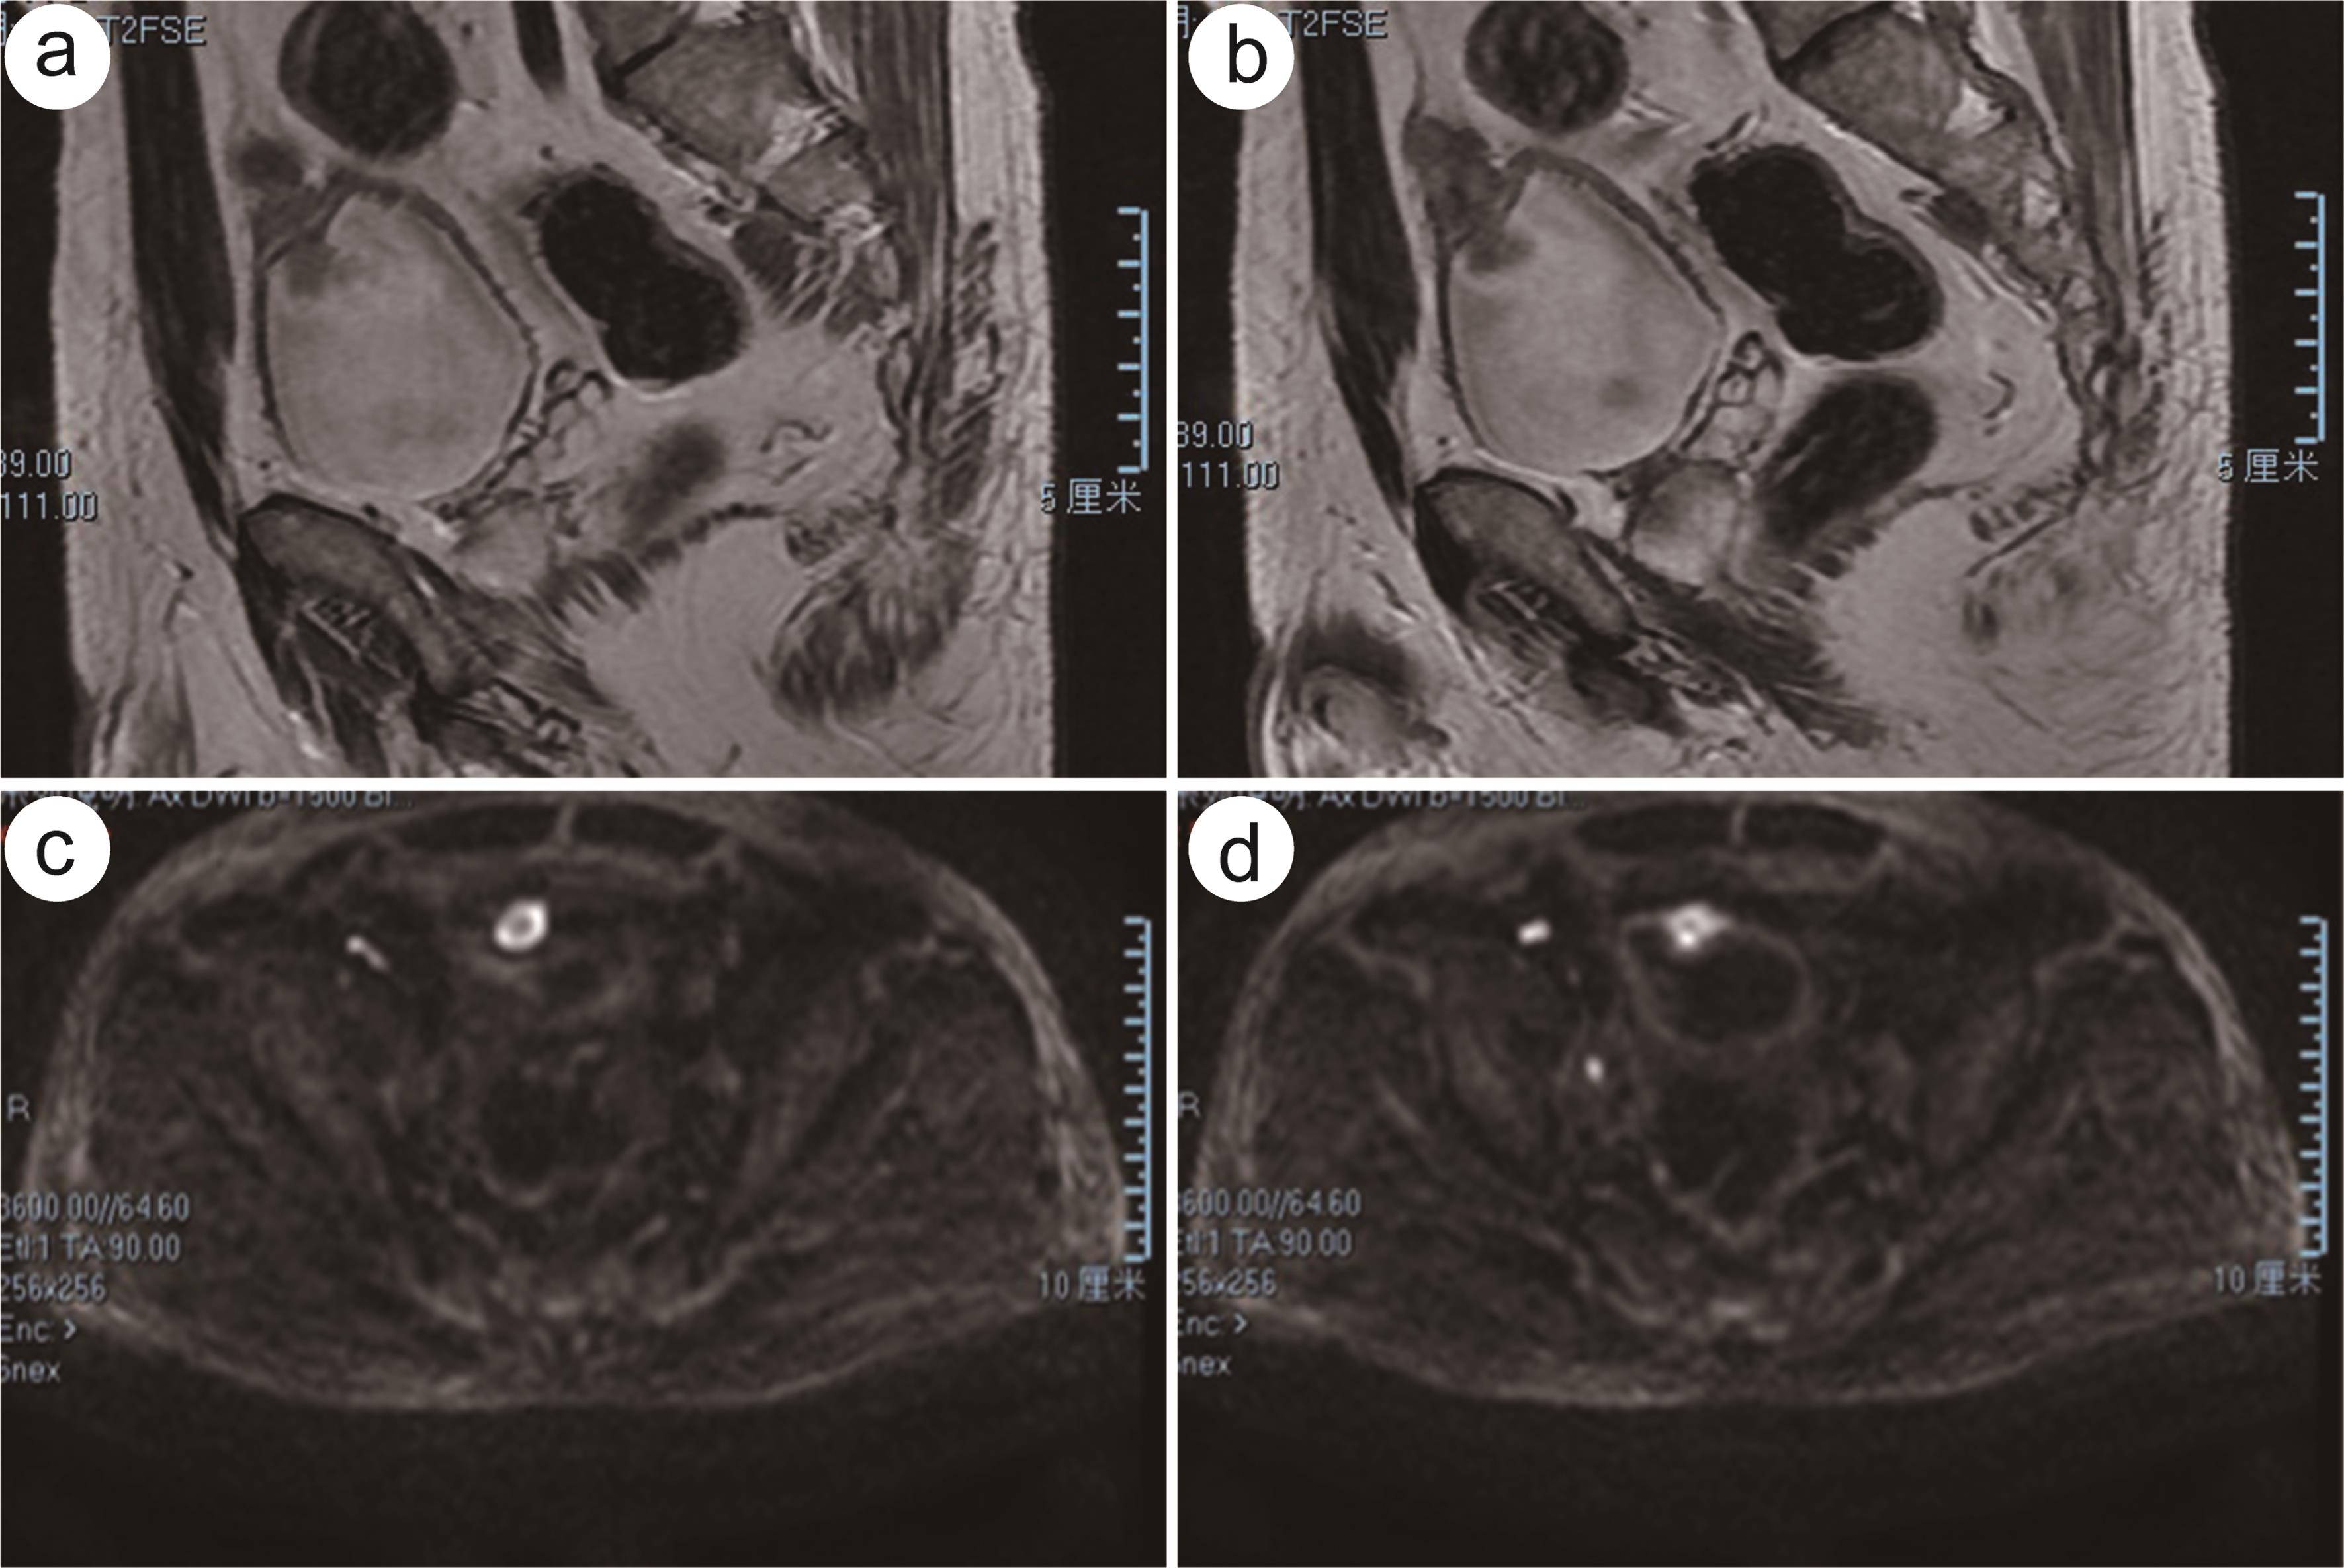 MRI showed that it was located at the junction of the bladder and urachal, showing infiltrative growth (a, b). It was a predominantly high signal on diffusion-weighted imaging images with a low signal shadow visible within it (c, d).